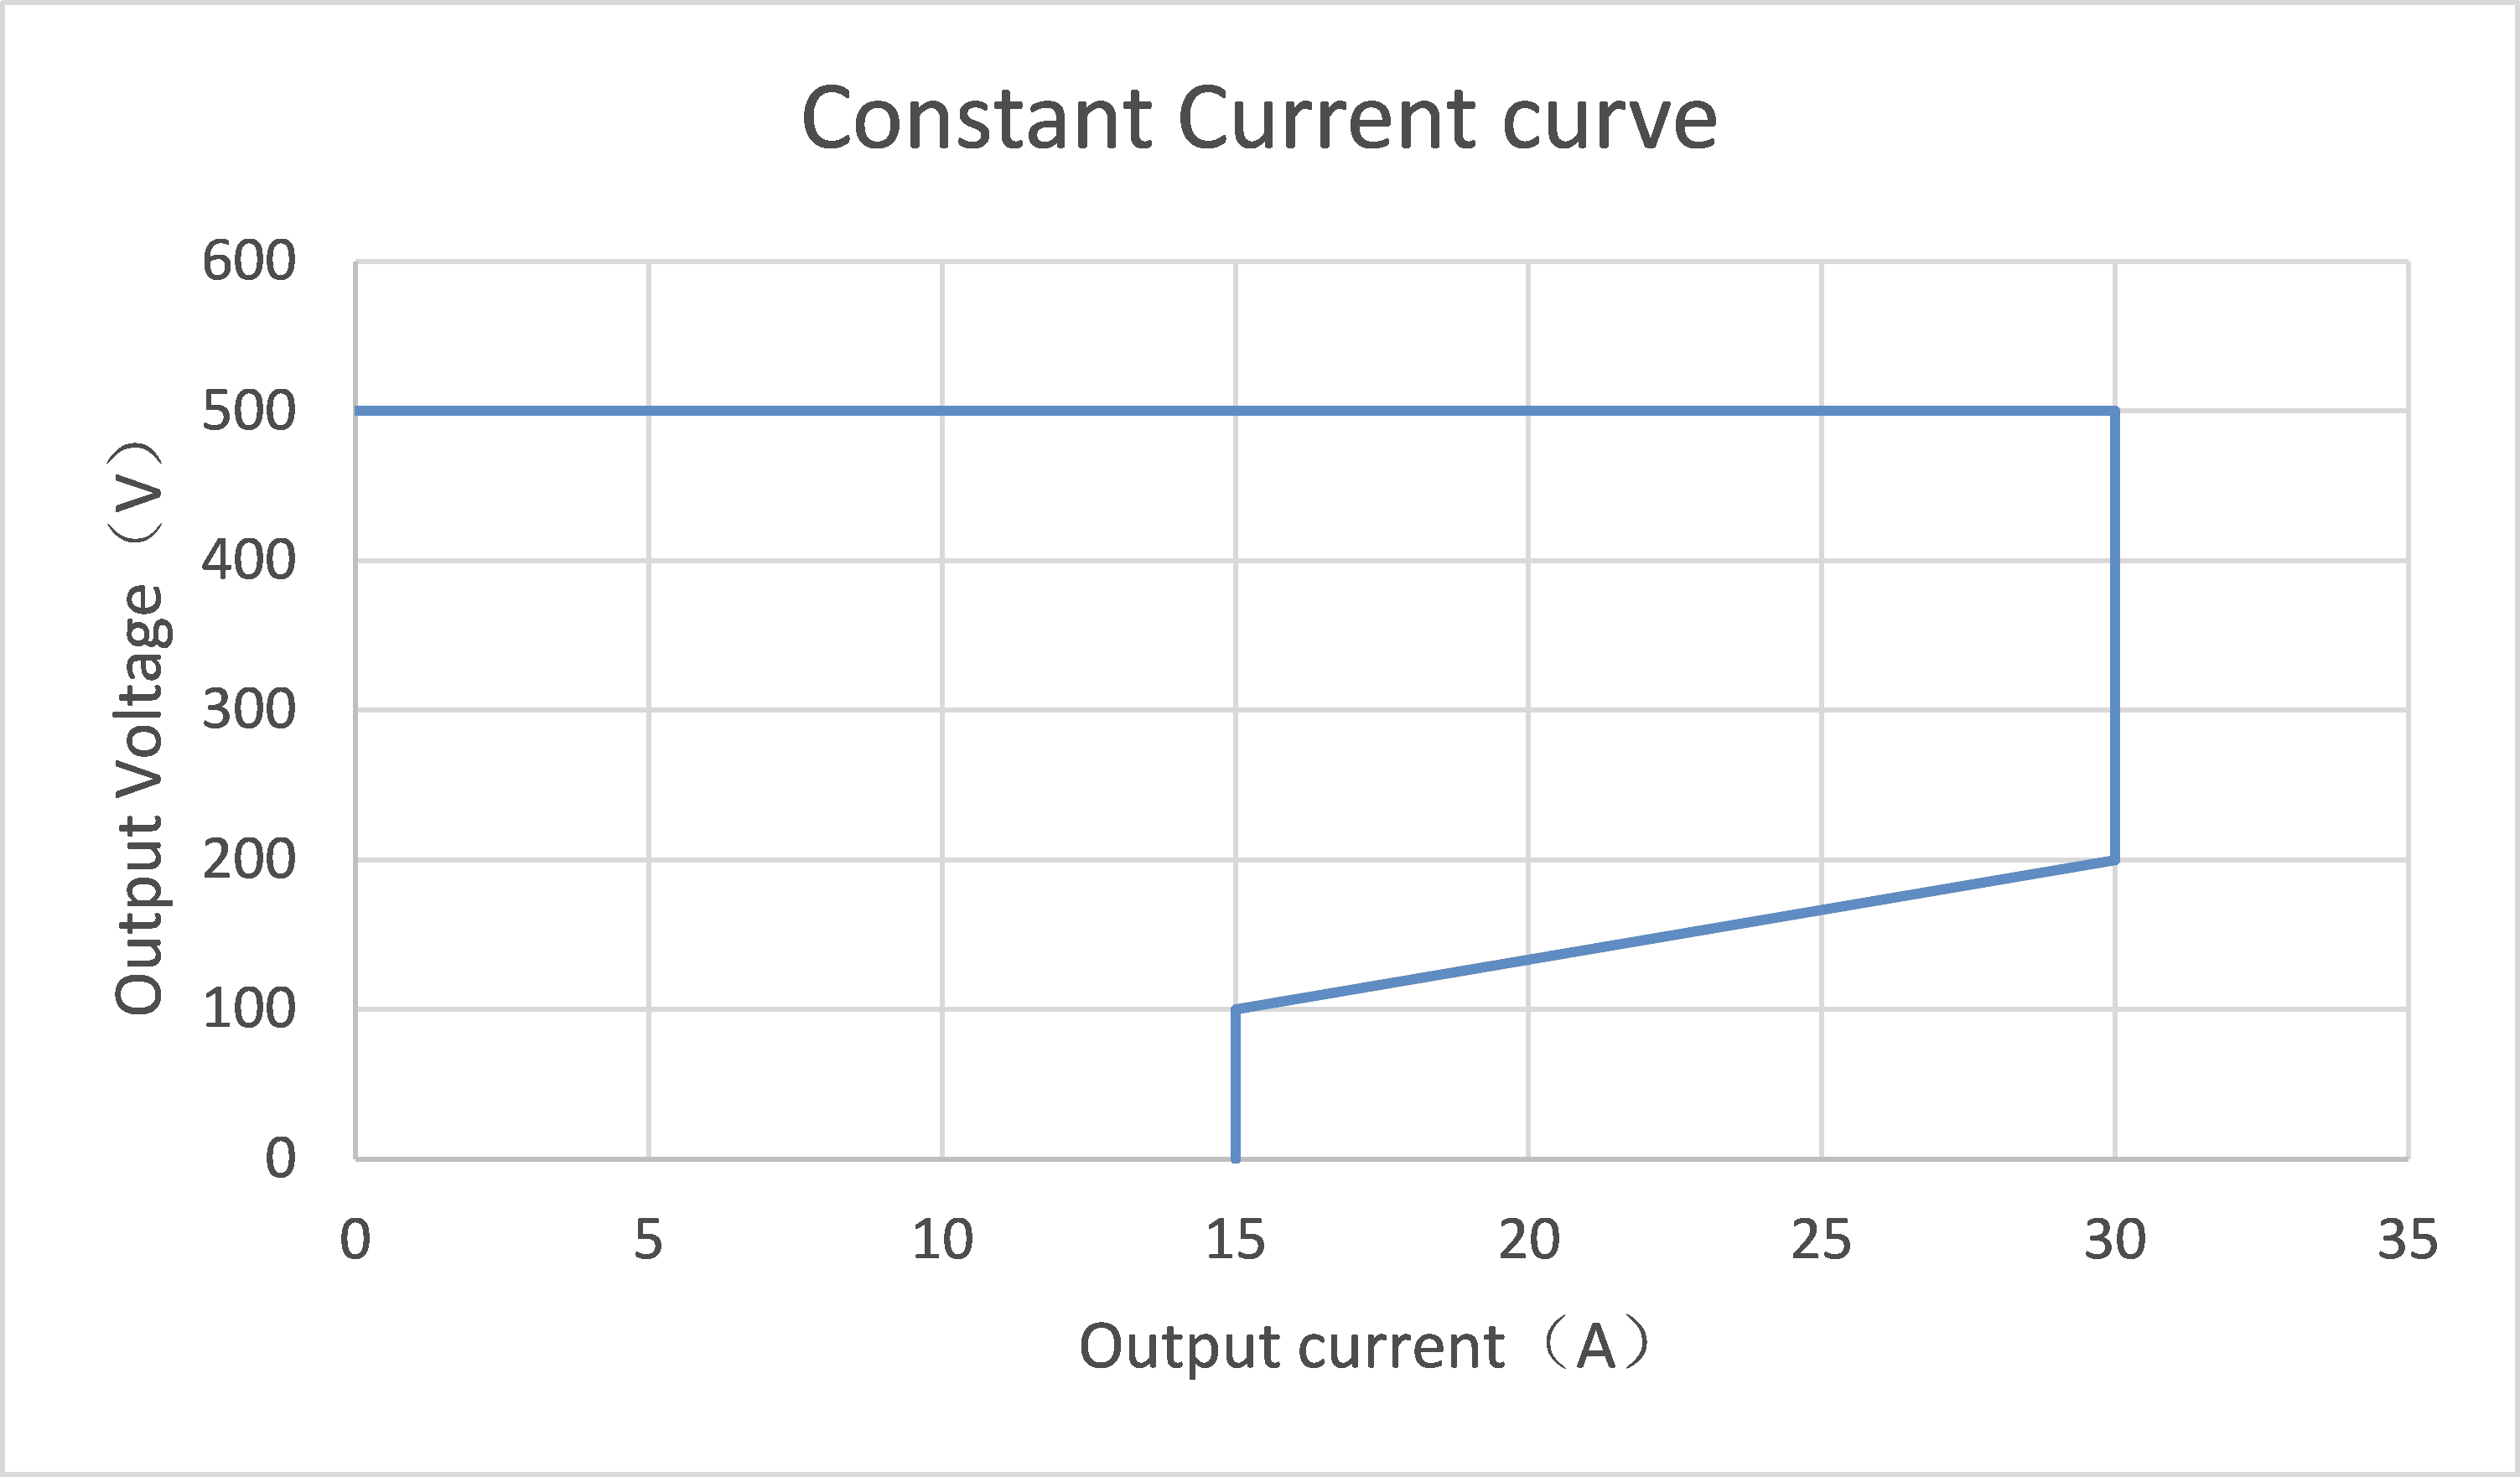 Constant Current curve of ev charger module